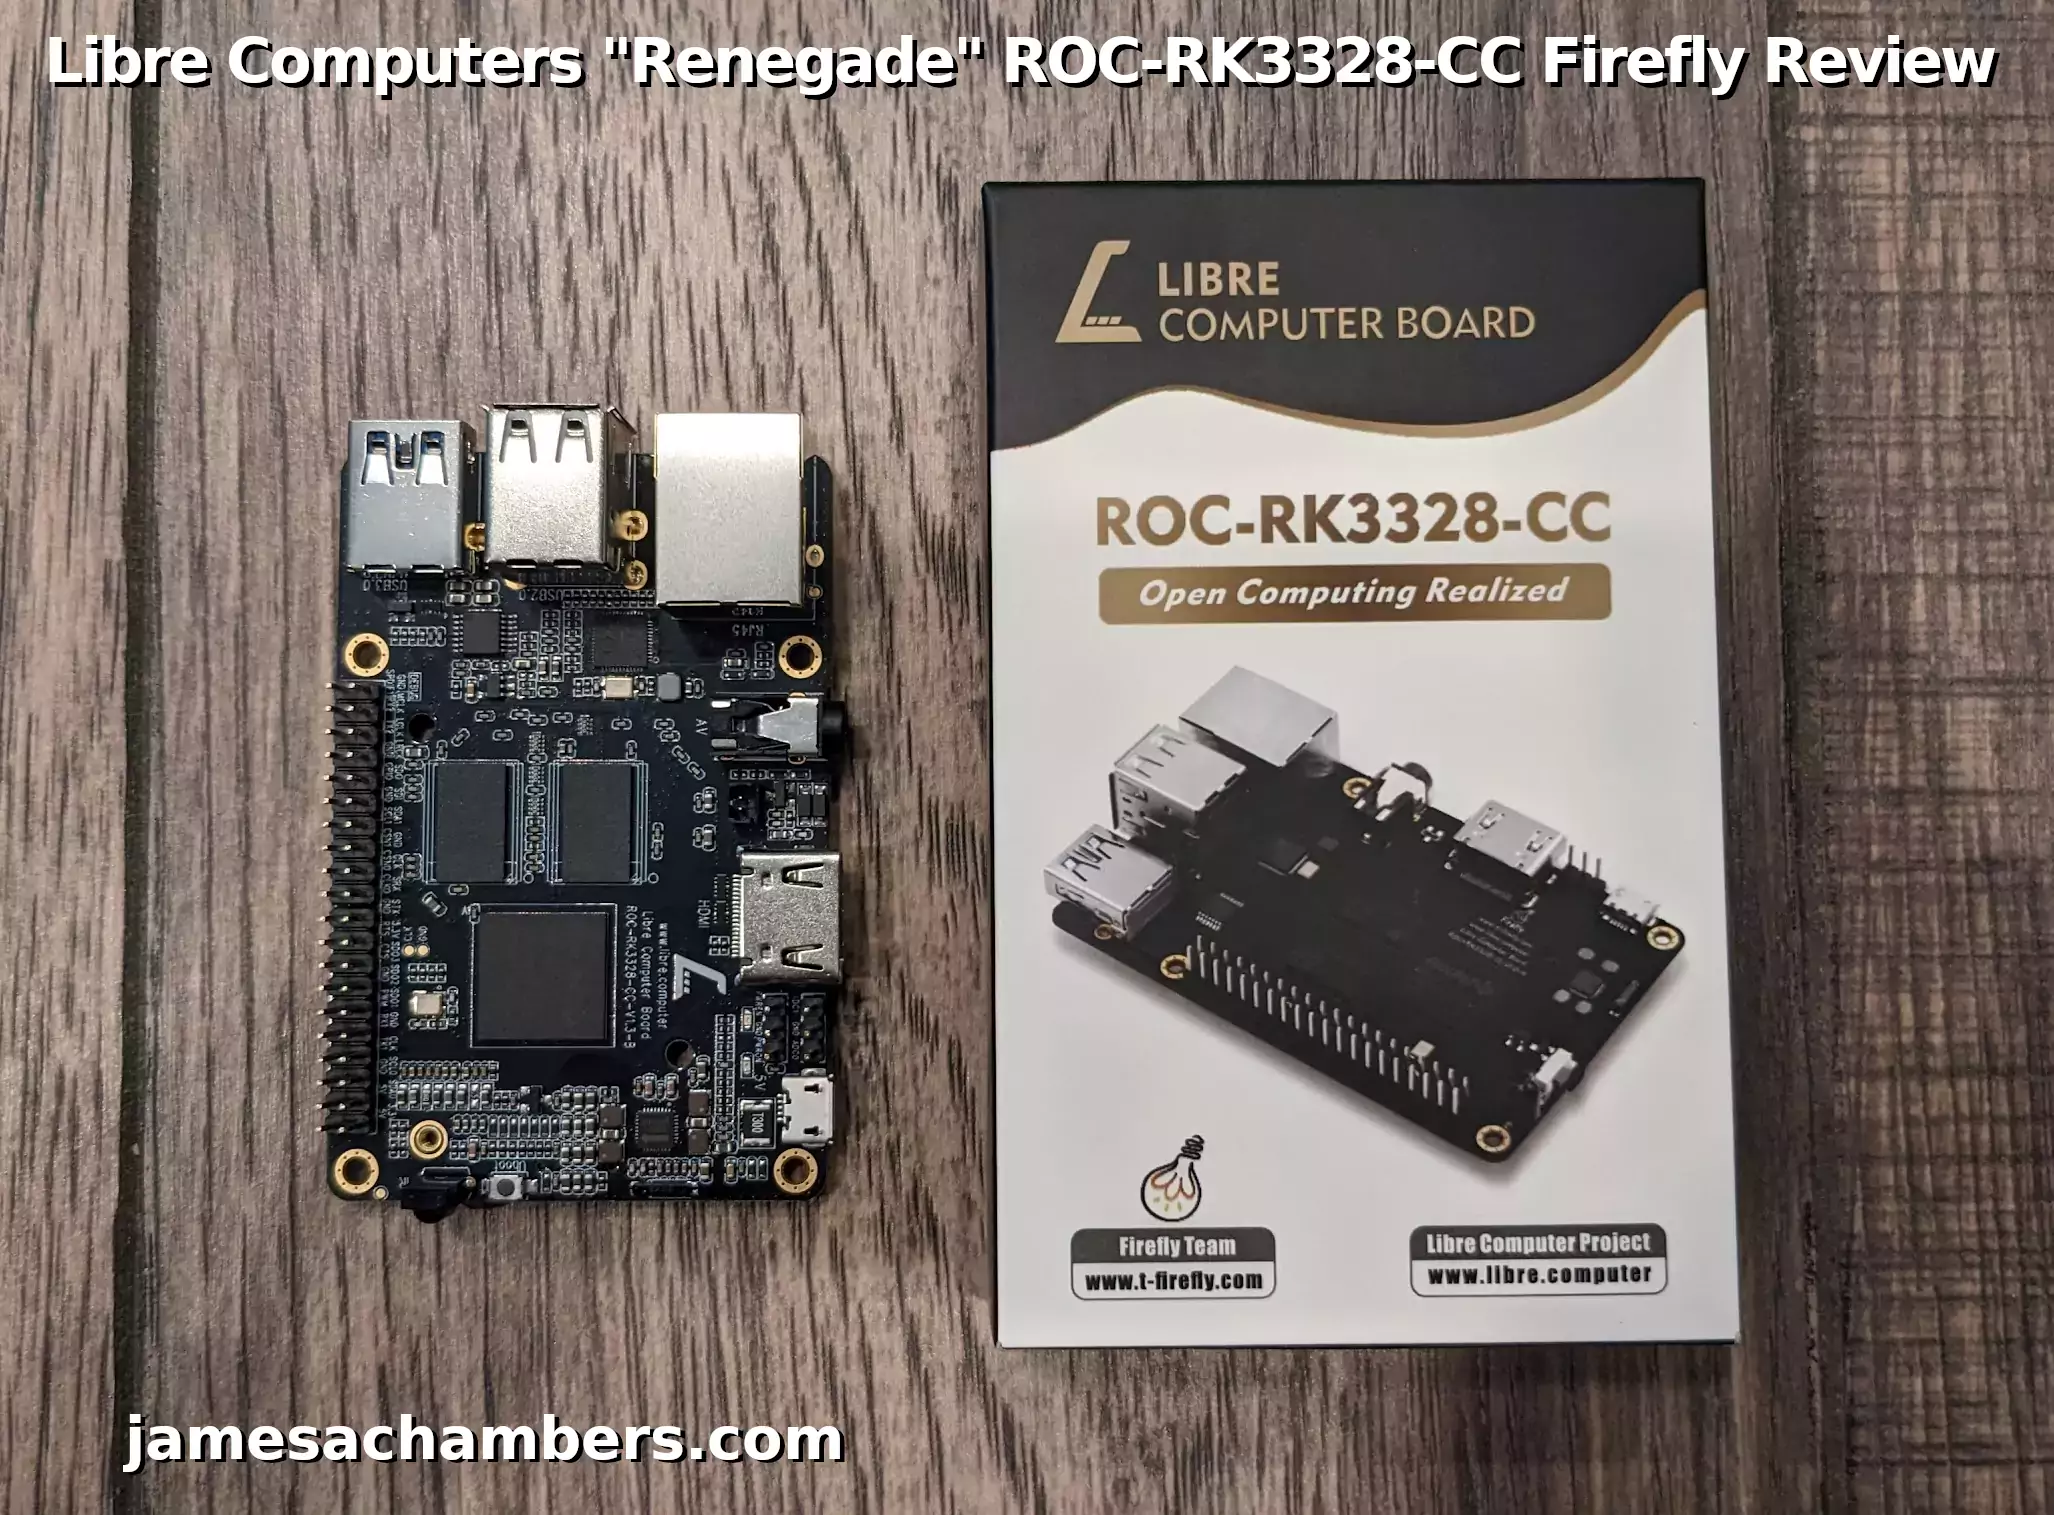 Libre Computers "Renegade" ROC-RK3328-CC Firefly Review